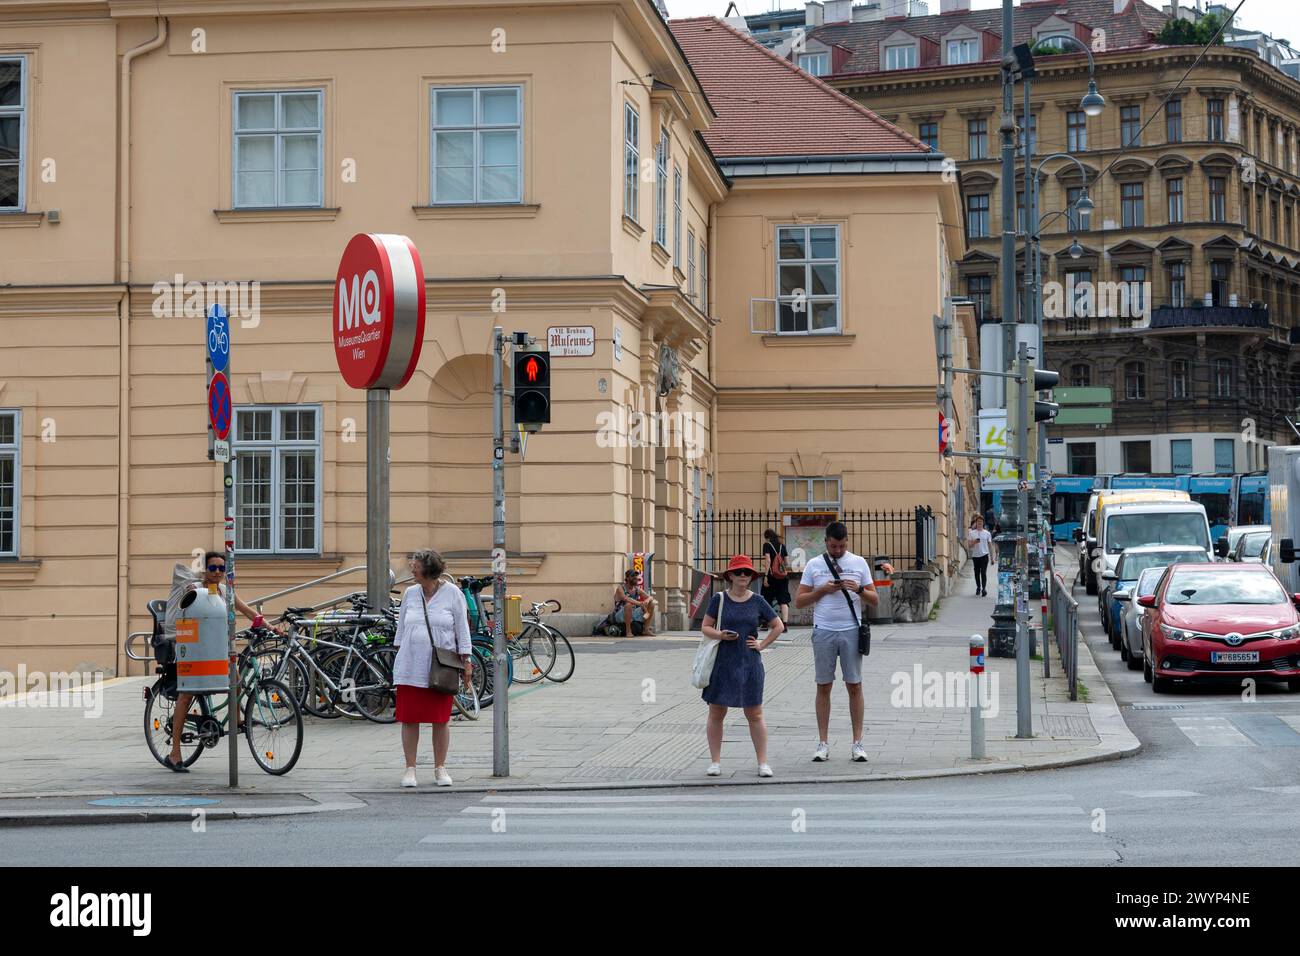 Vienna, Austria - June 21, 2023: People at a pedestrian crossing waiting for a green light Stock Photo